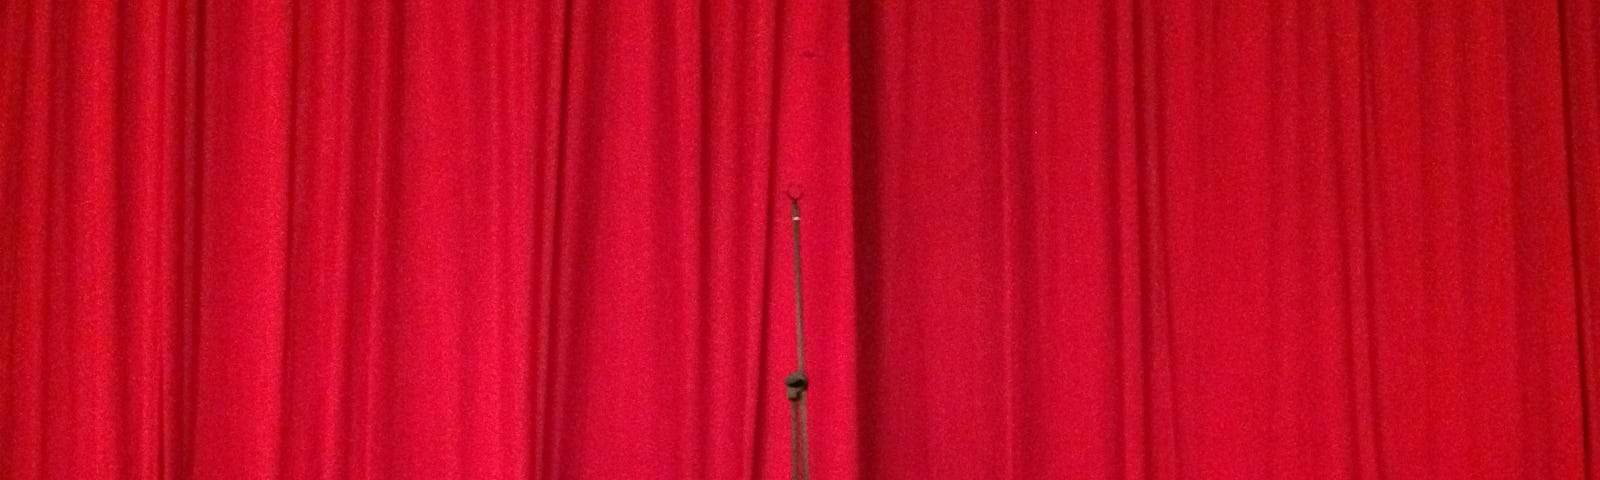 Red curtain on a stage.